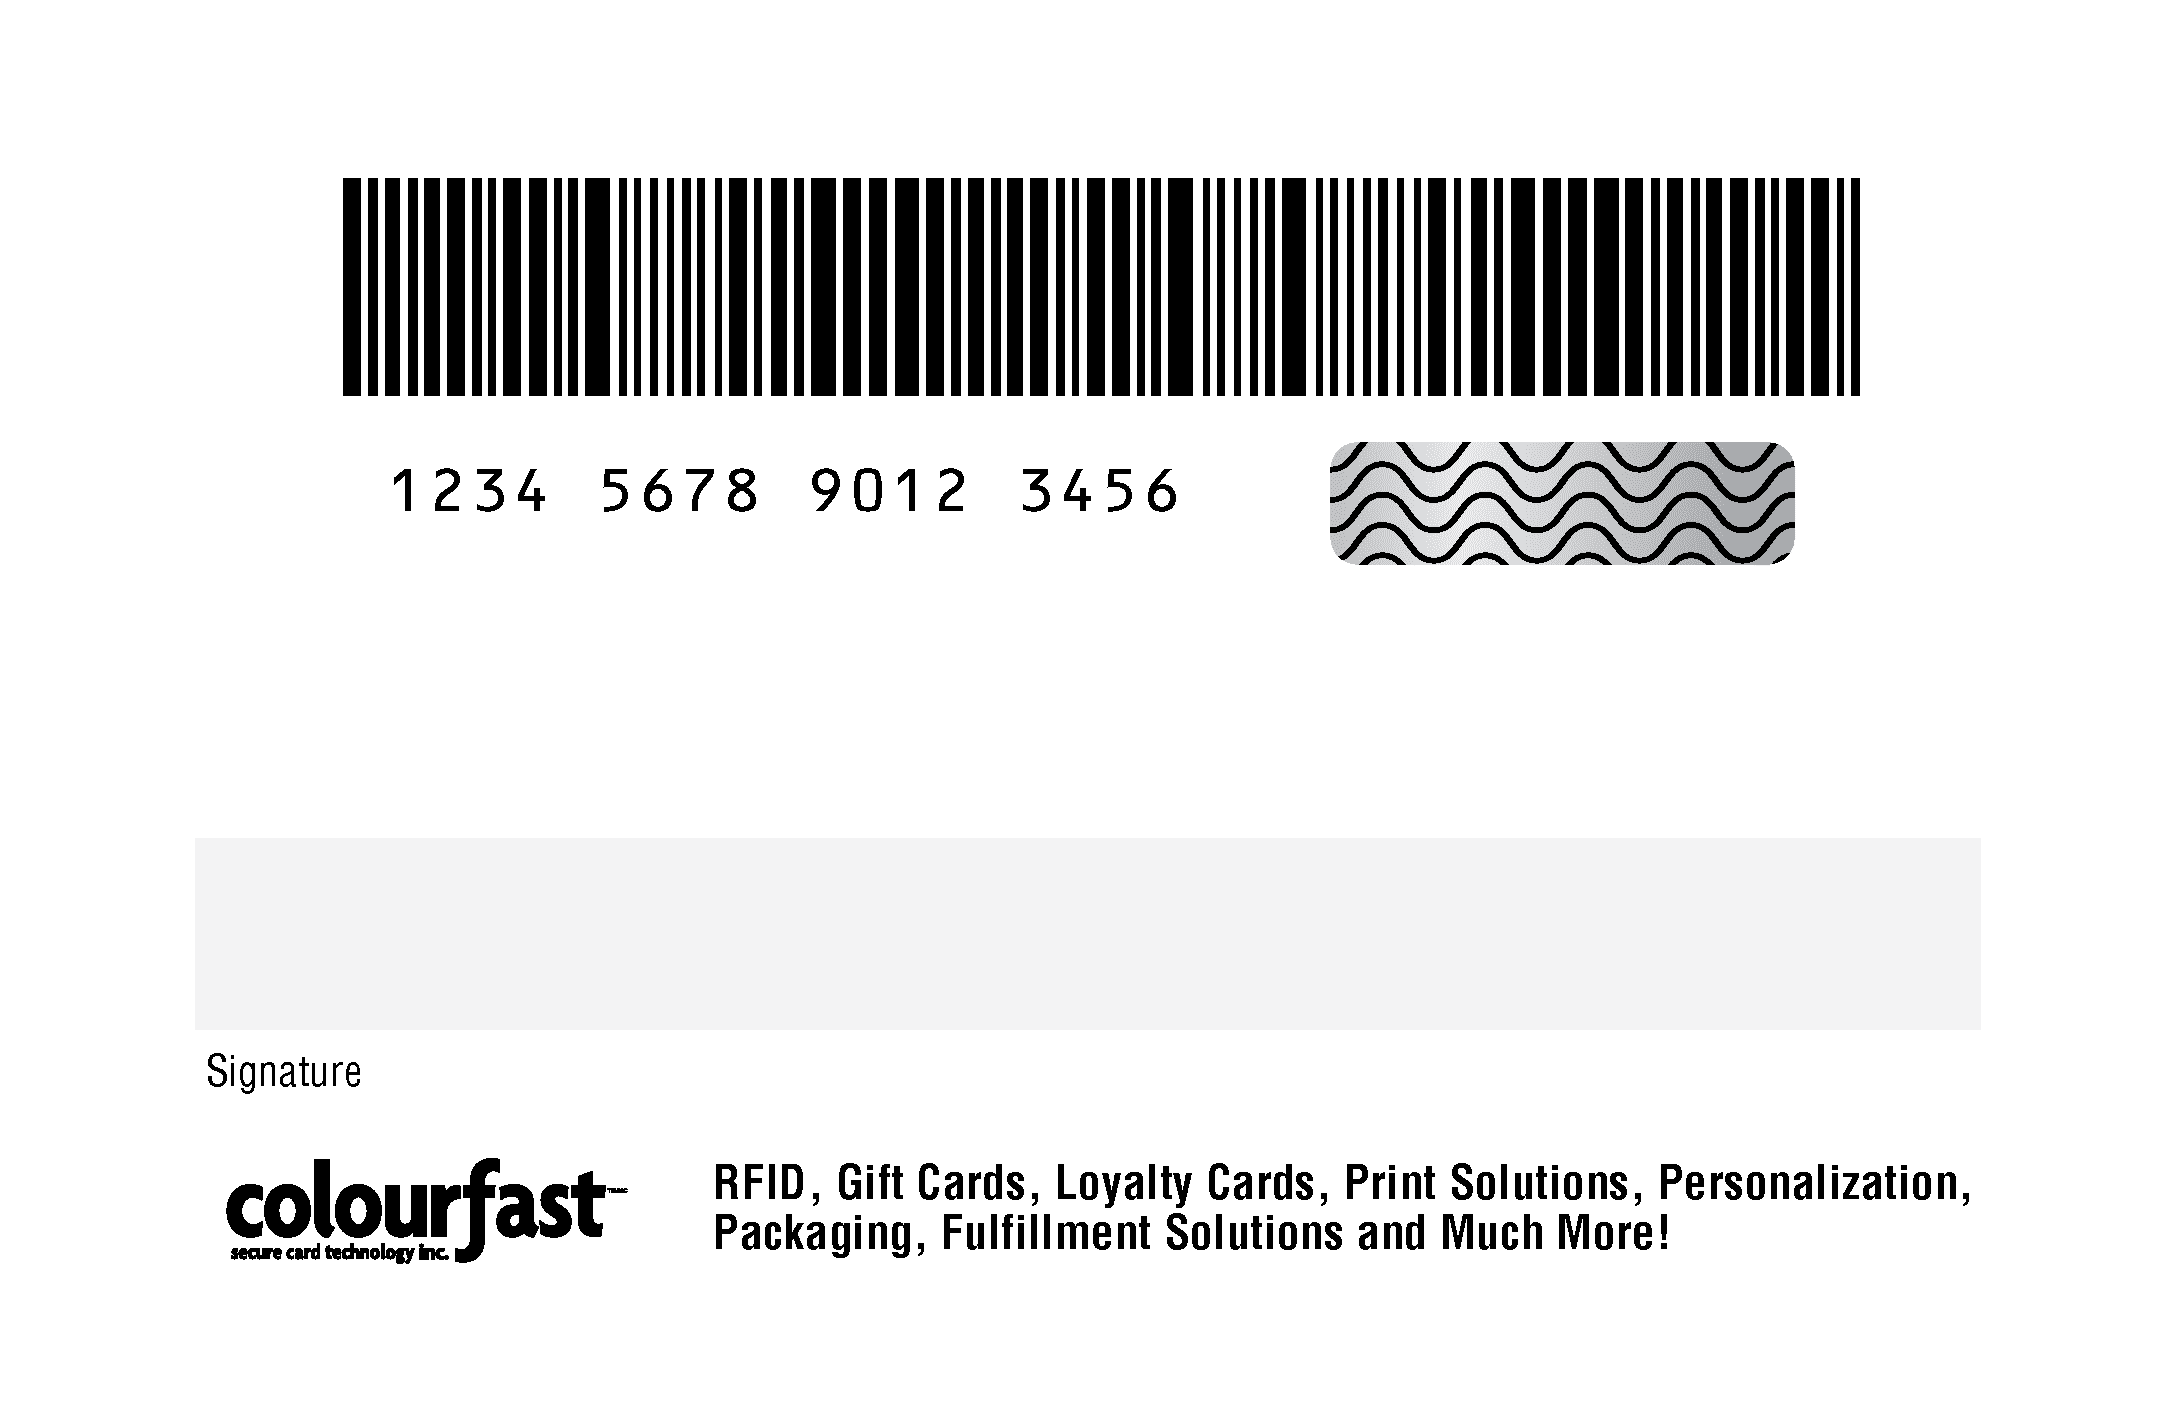 Image of Variable Barcode, Human-readable number, Signature Panel, Scratch Off Panel